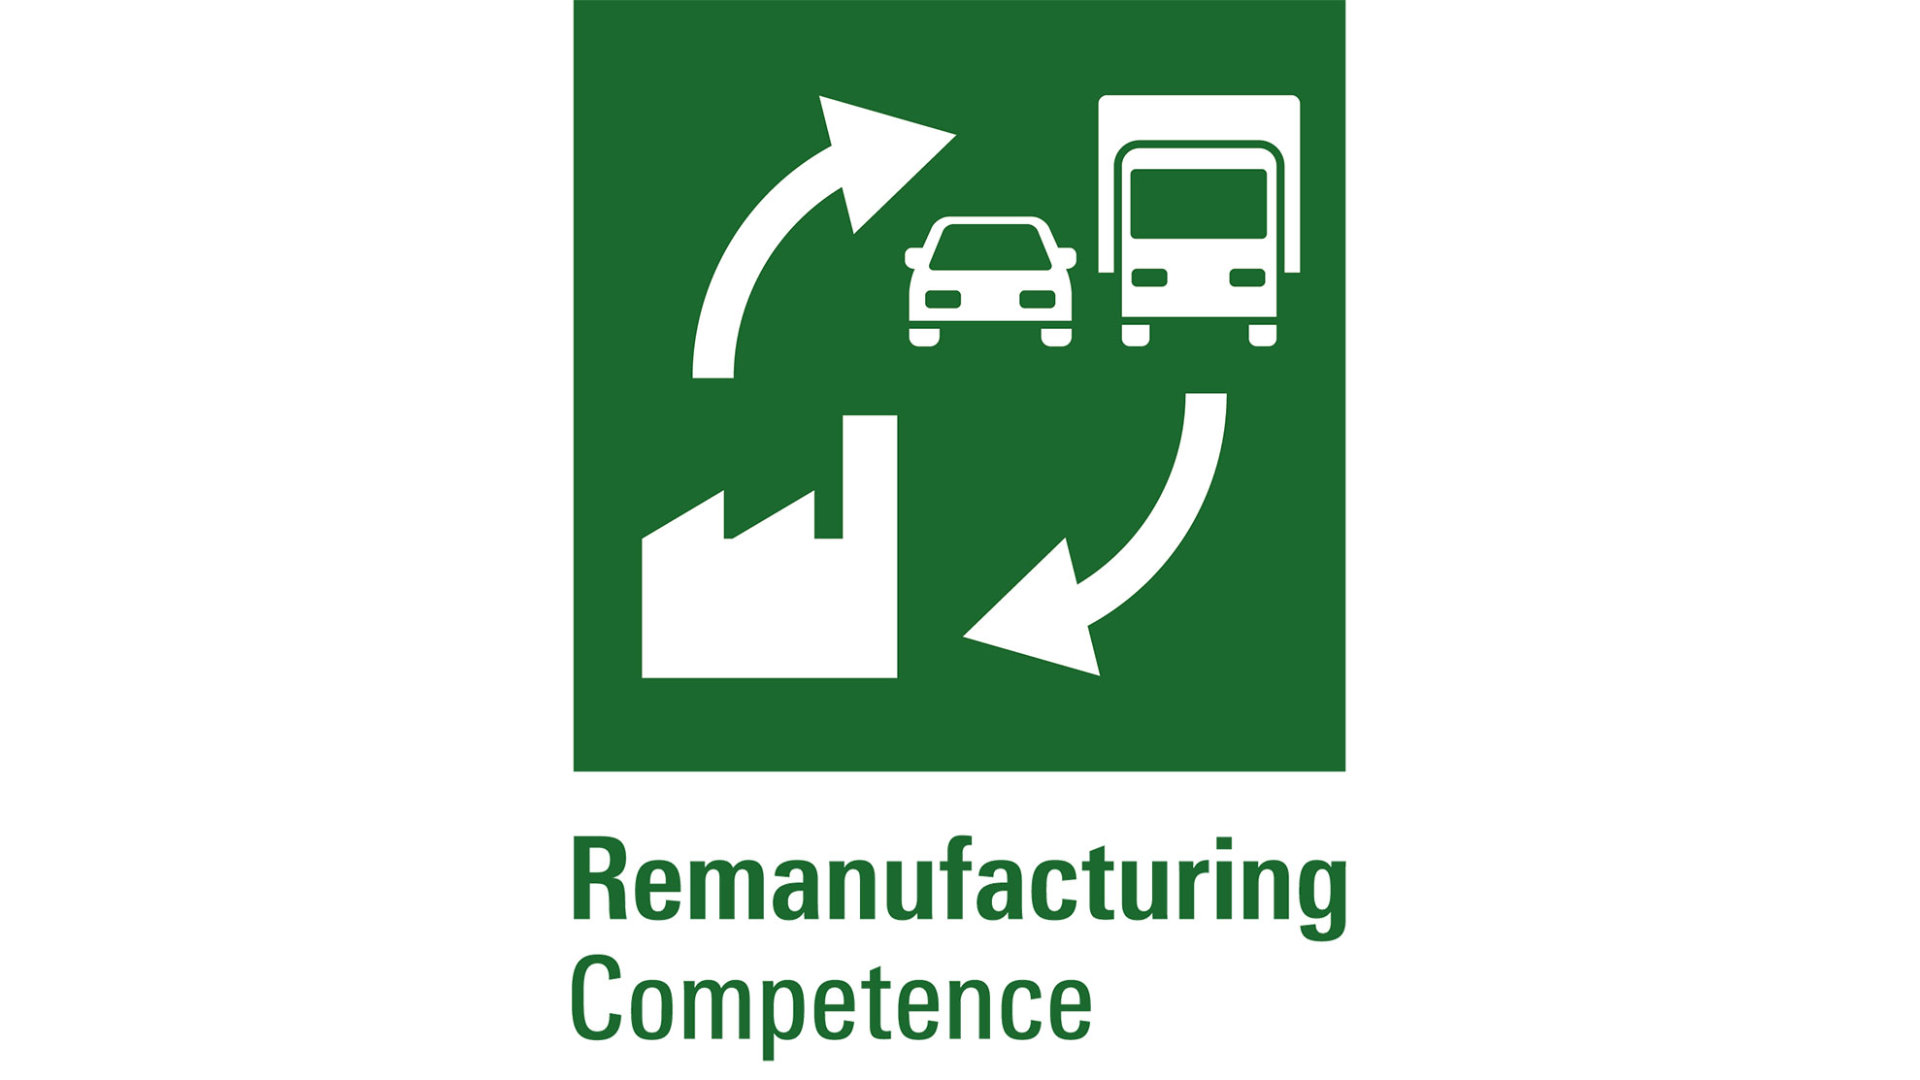 Remanufacturing Competence